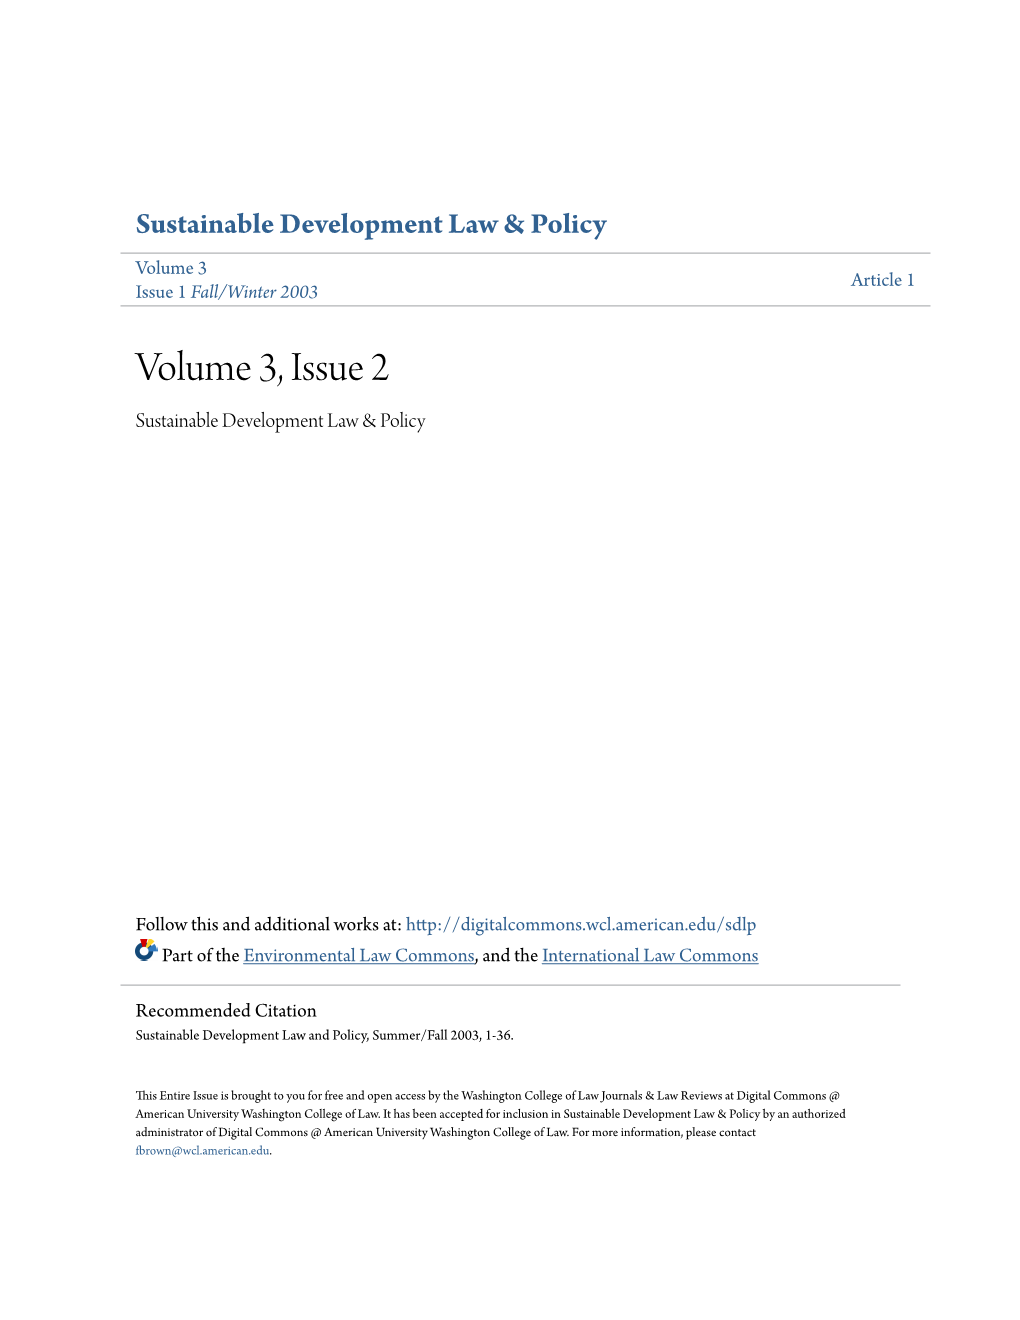 Volume 3, Issue 2 Sustainable Development Law & Policy